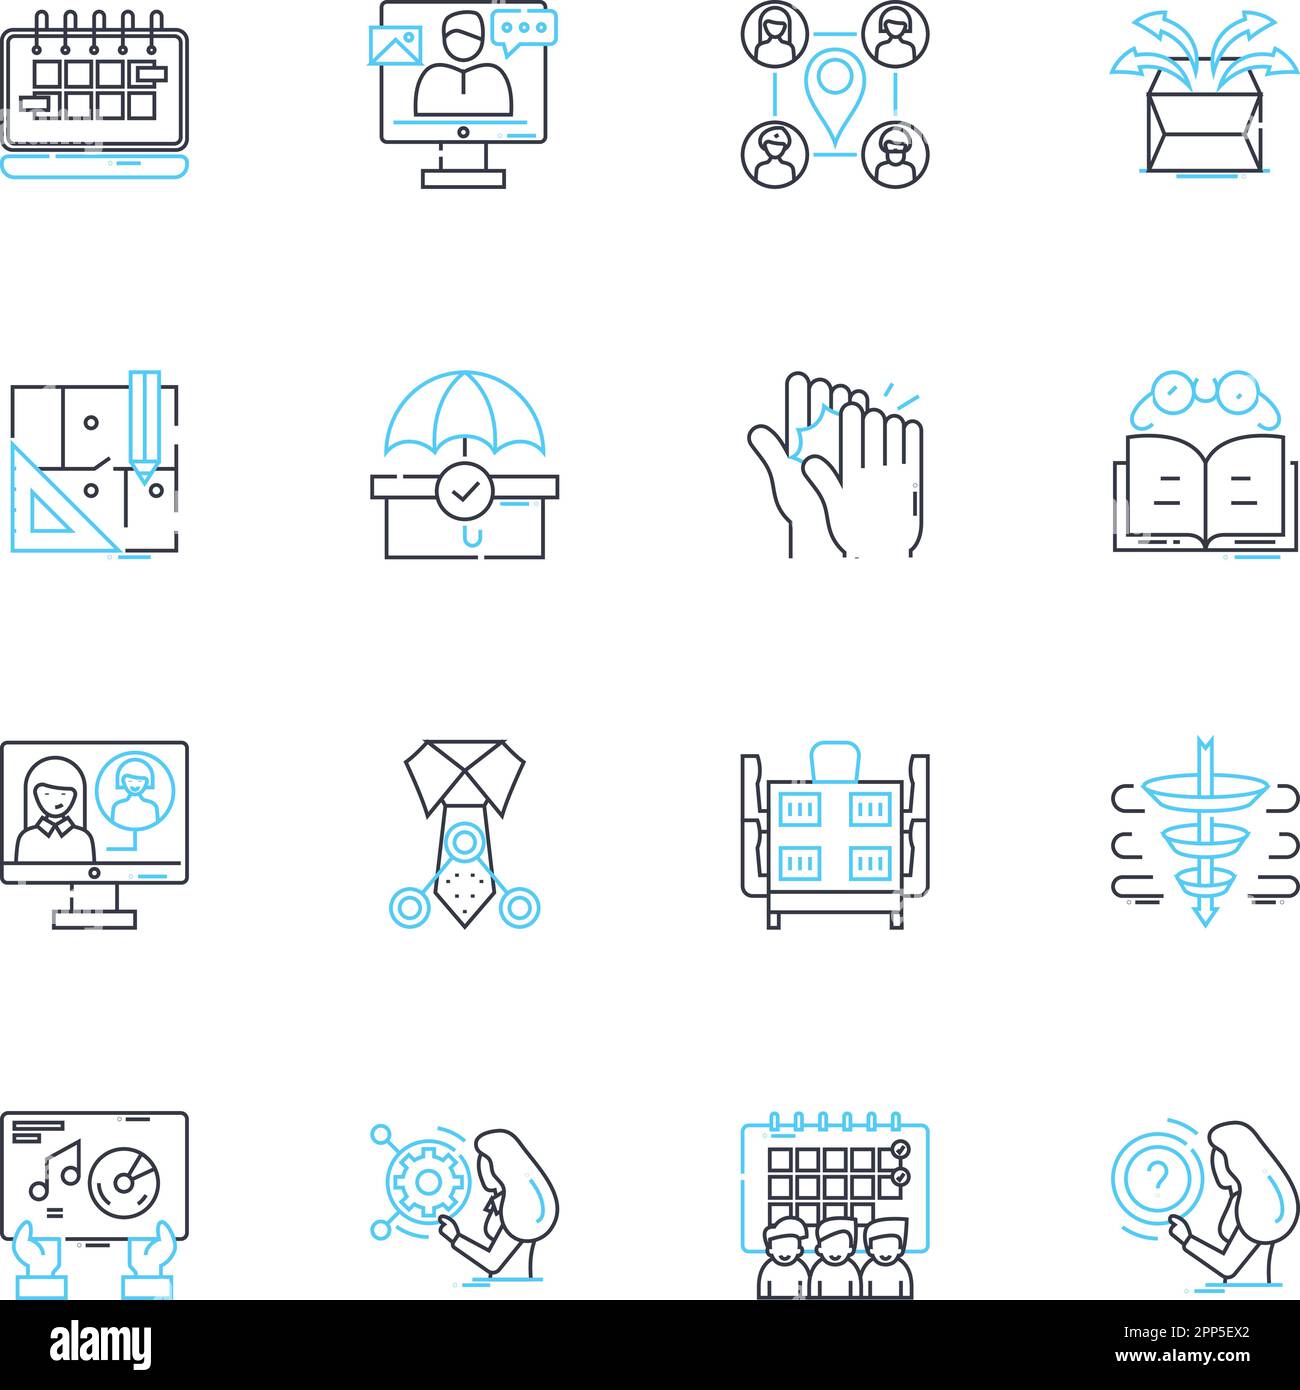 Trade union linear icons set. Solidarity, Collective bargaining, Strike, Negotiation, Labor rights, Advocacy, Membership line vector and concept signs Stock Vector